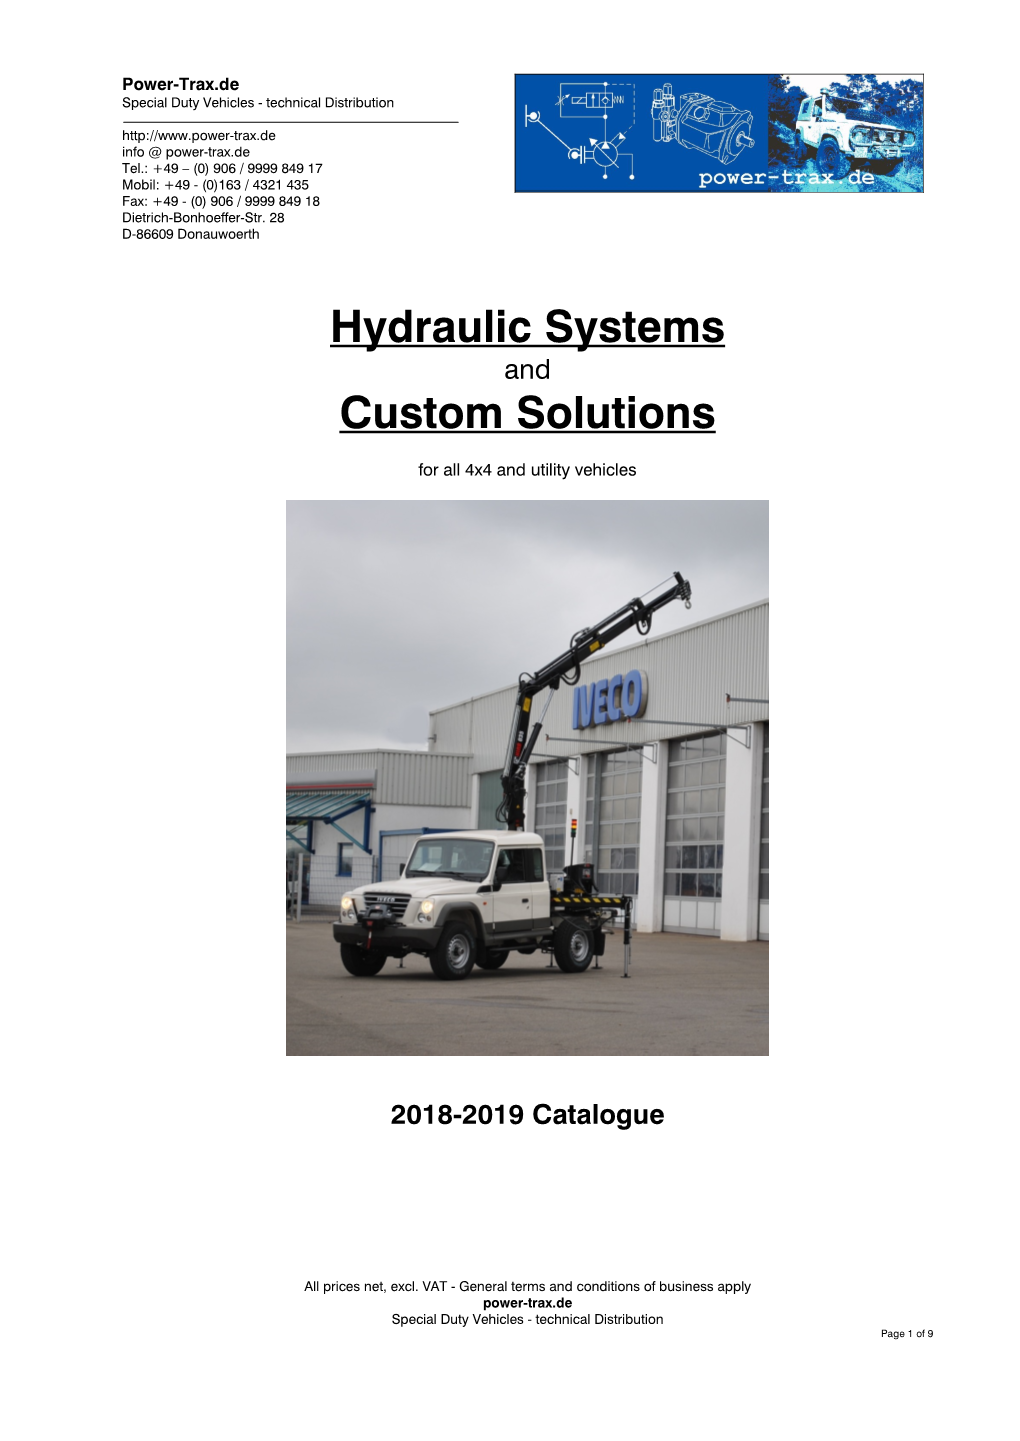 Brochure Ptos and Hydraulic Systems (All Vehicle Brands)